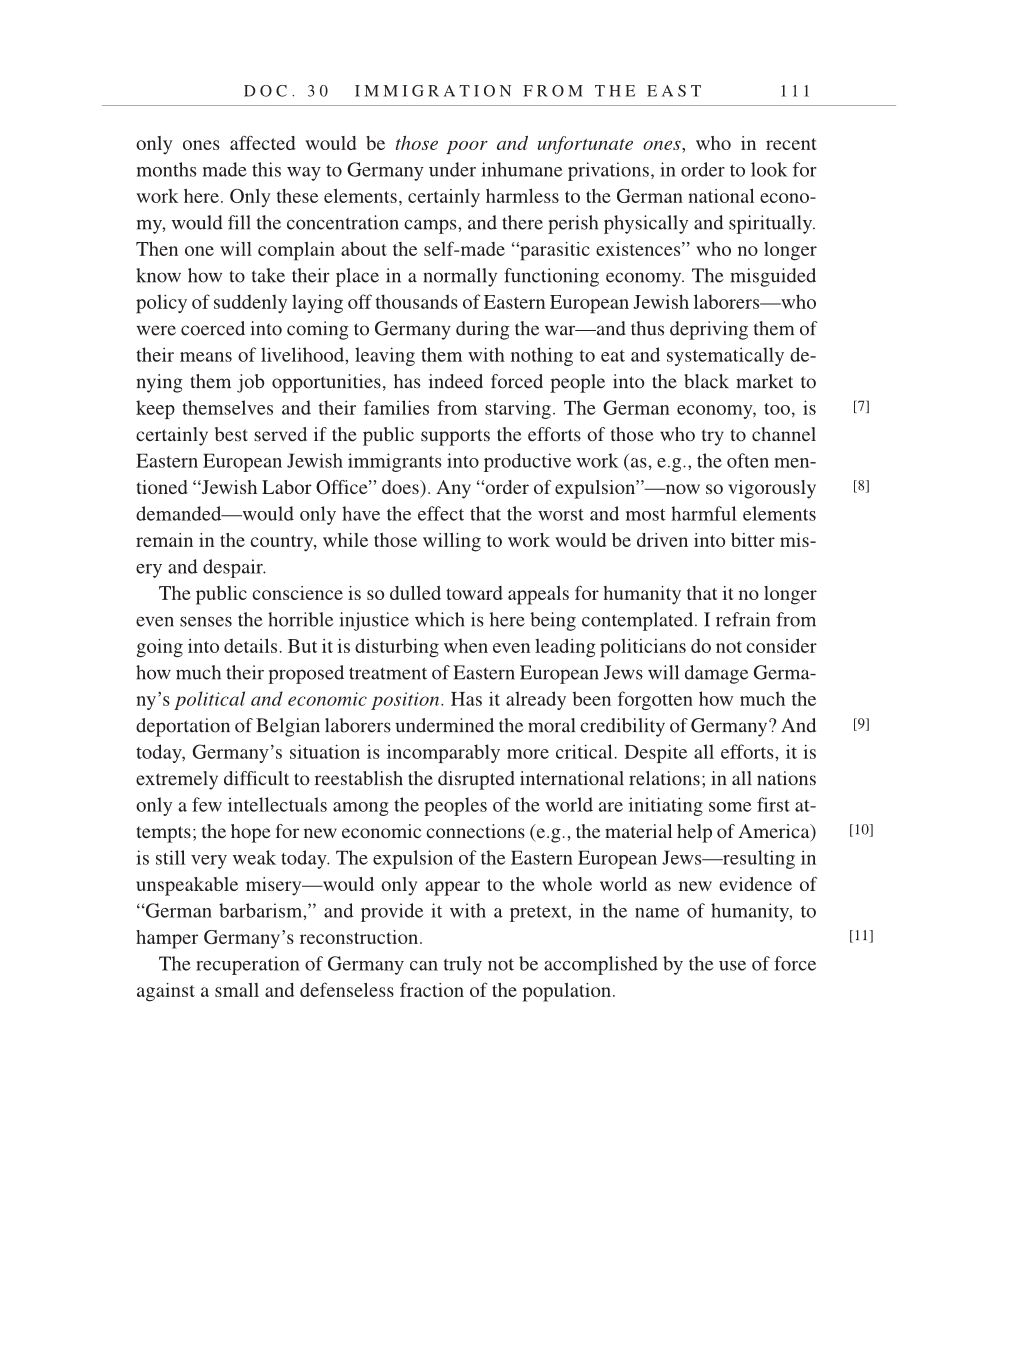 Volume 7: The Berlin Years: Writings, 1918-1921 (English translation supplement) page 111